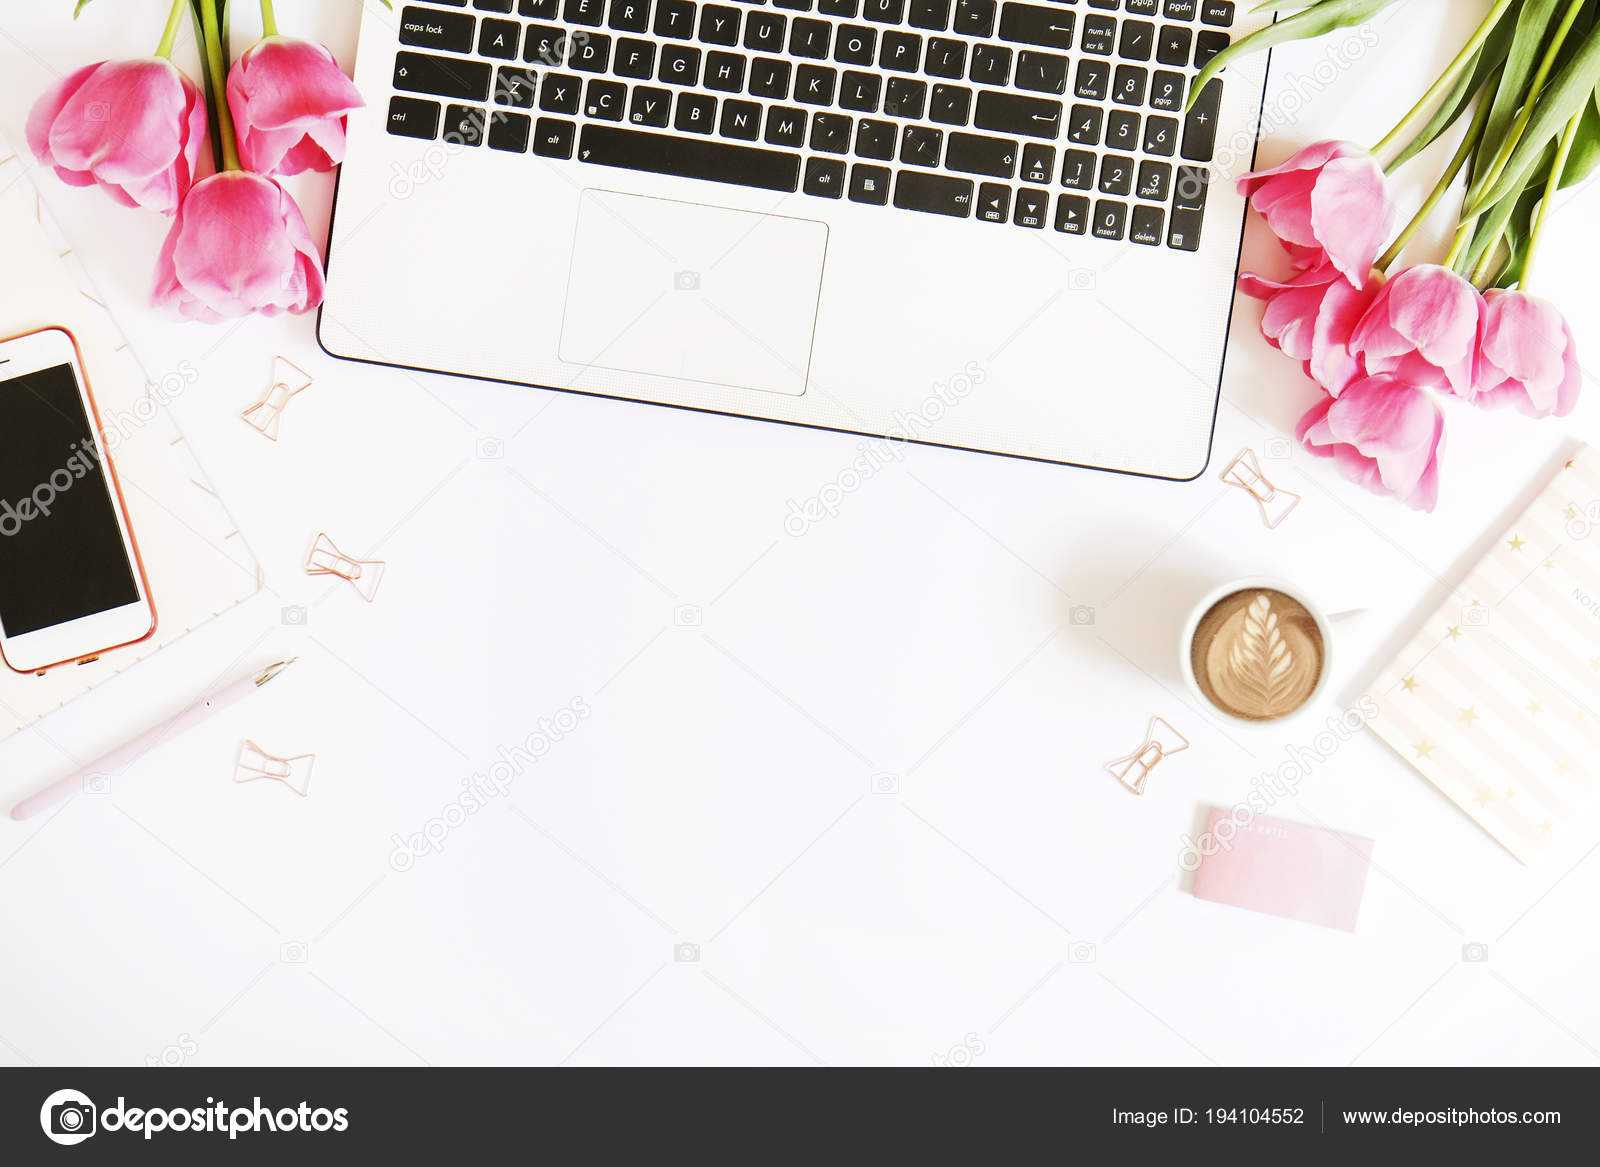 Top View Of Female Worker Desktop With Laptop Flowers And